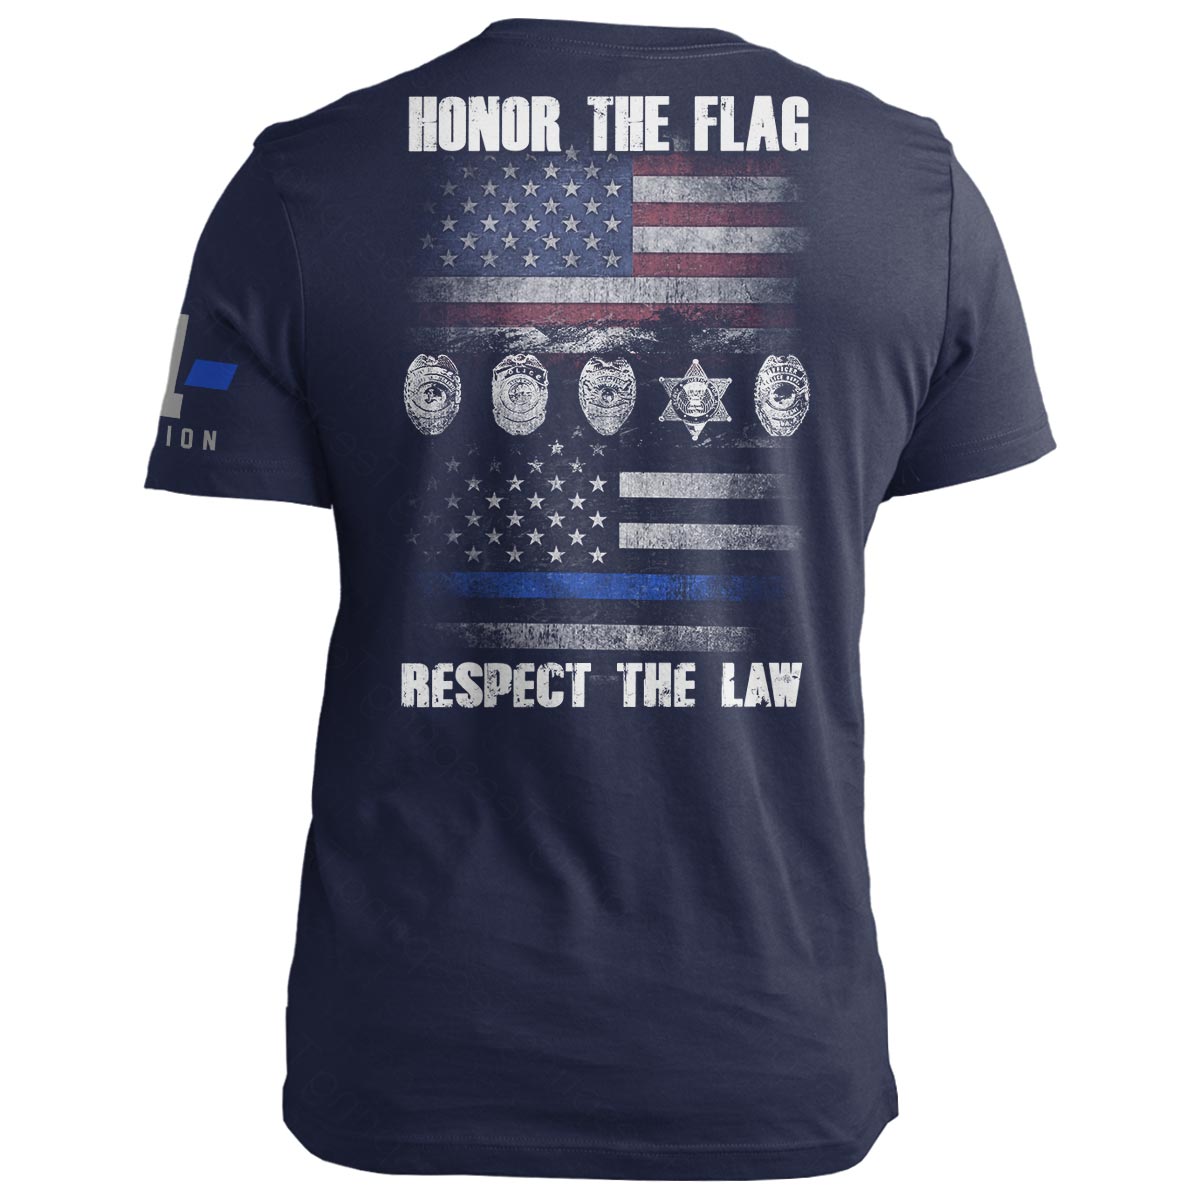 Honor The Flag. Respect The Law